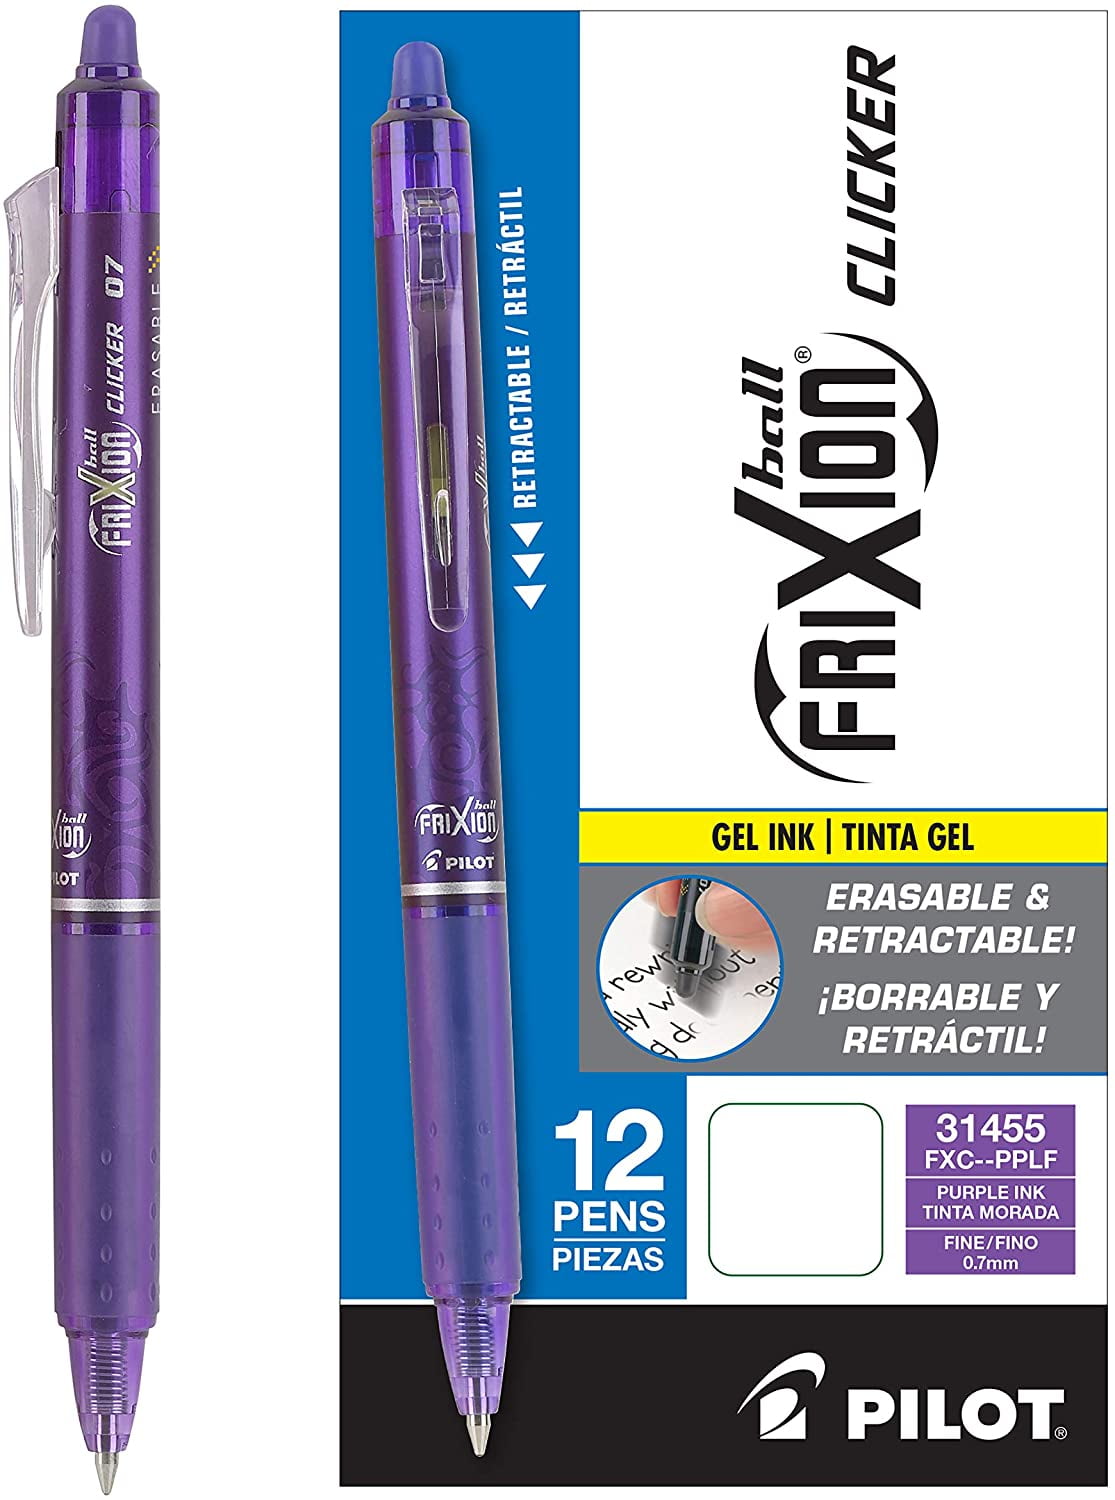 Pilot's FriXion introduces erasable markers - The Gadgeteer